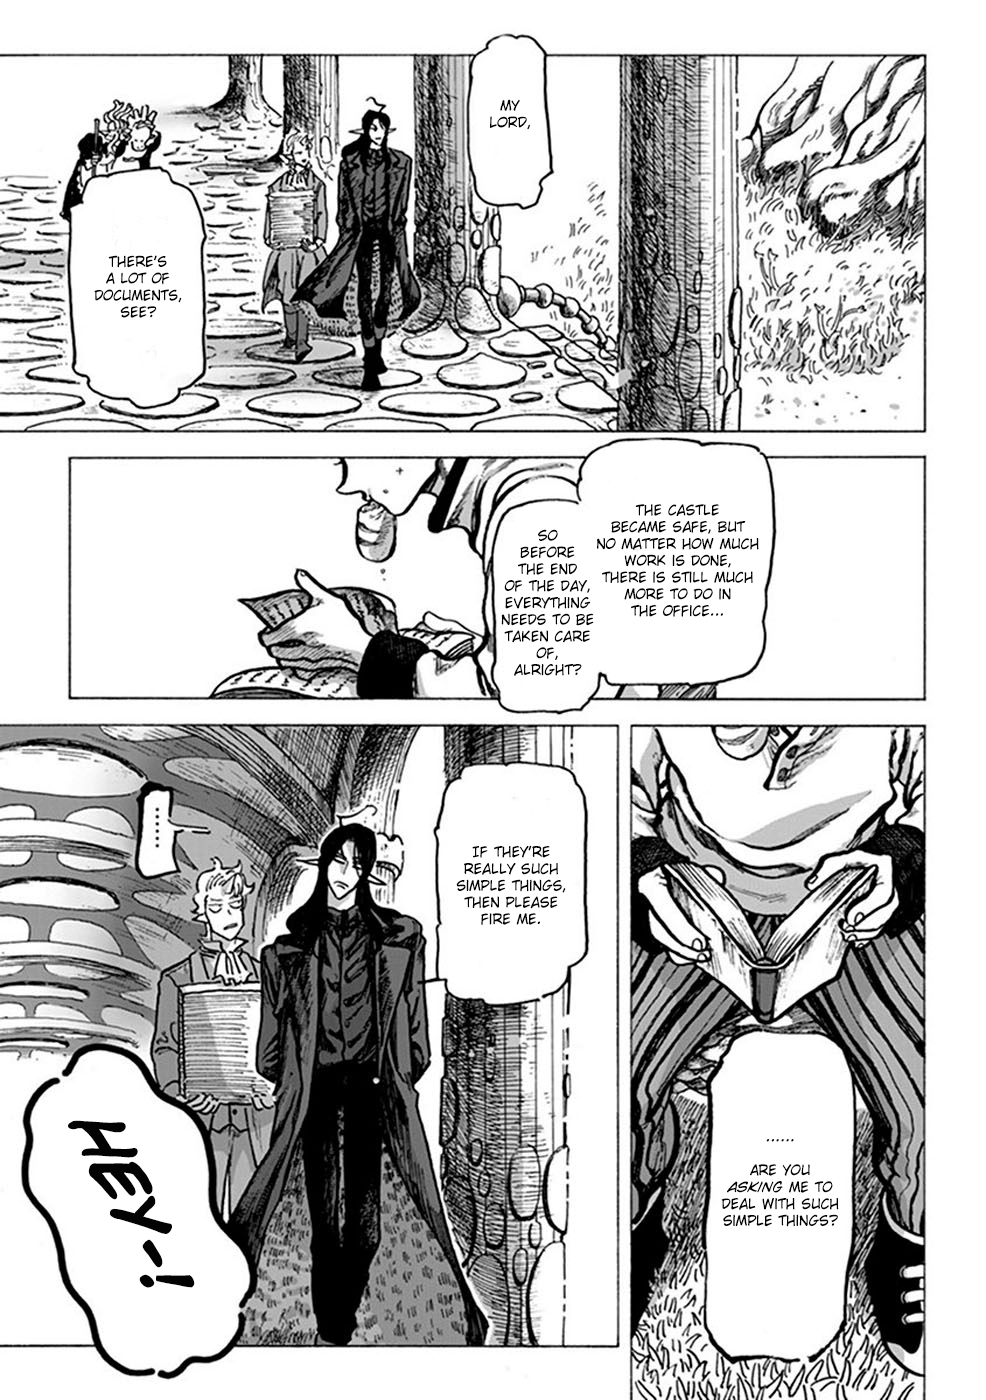 Hero In The Satan's House Vol. 1 Ch. 3 The Hero has become friends with the Demon King...!